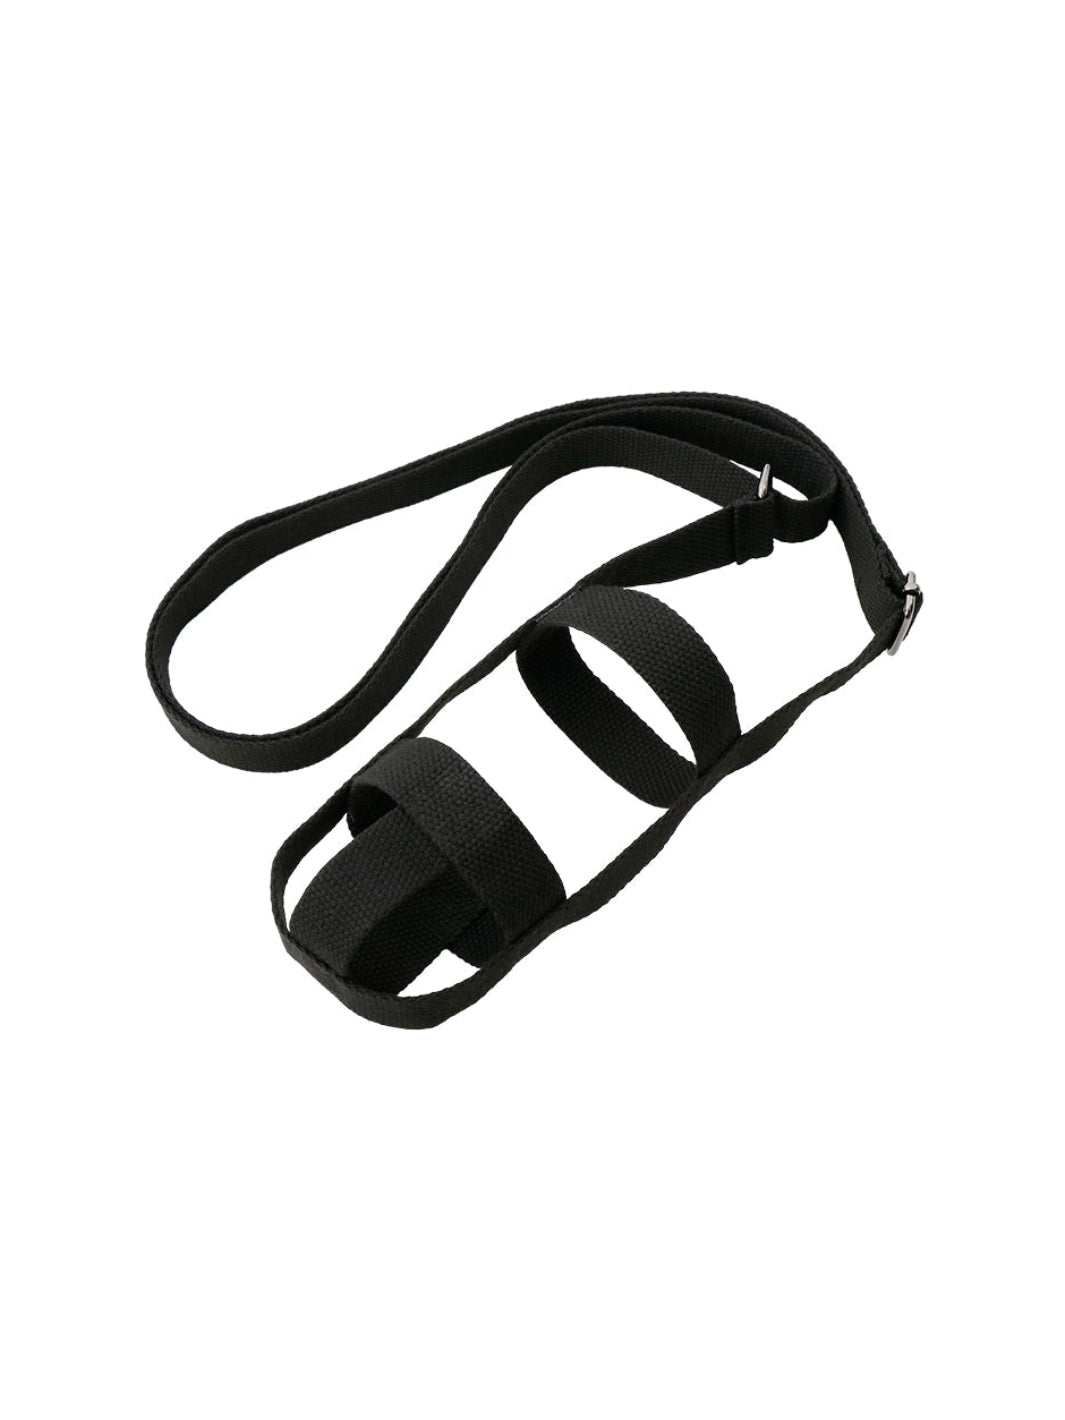 KINTO Tumbler Strap (Large) (80mm/3.2in)